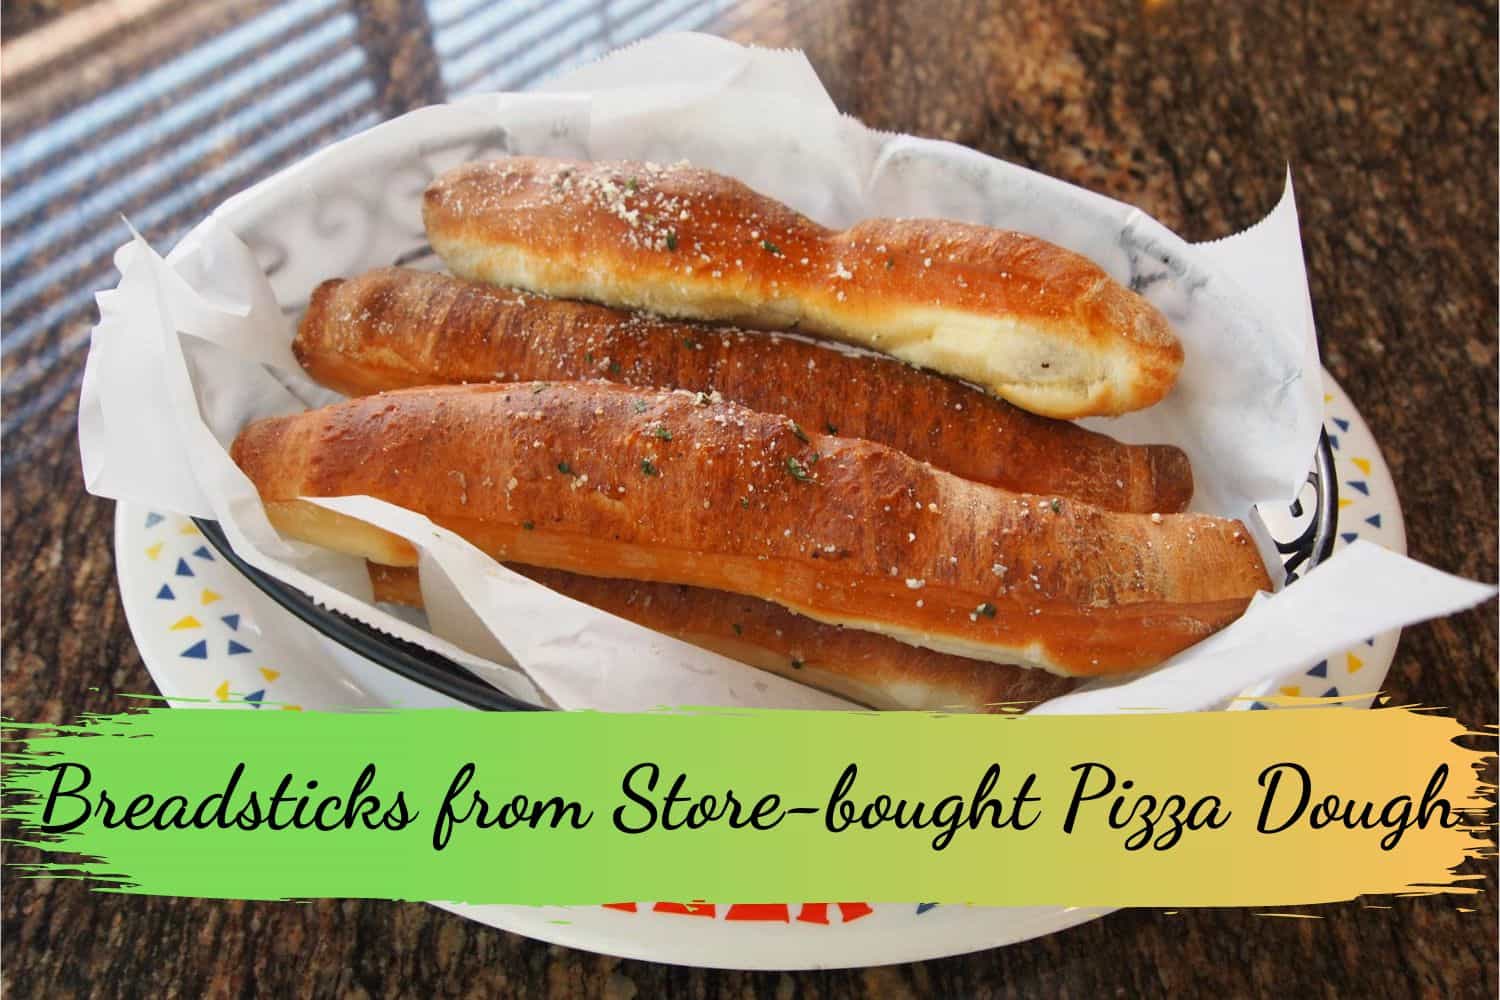 Breadsticks from Store-bought Pizza Dough